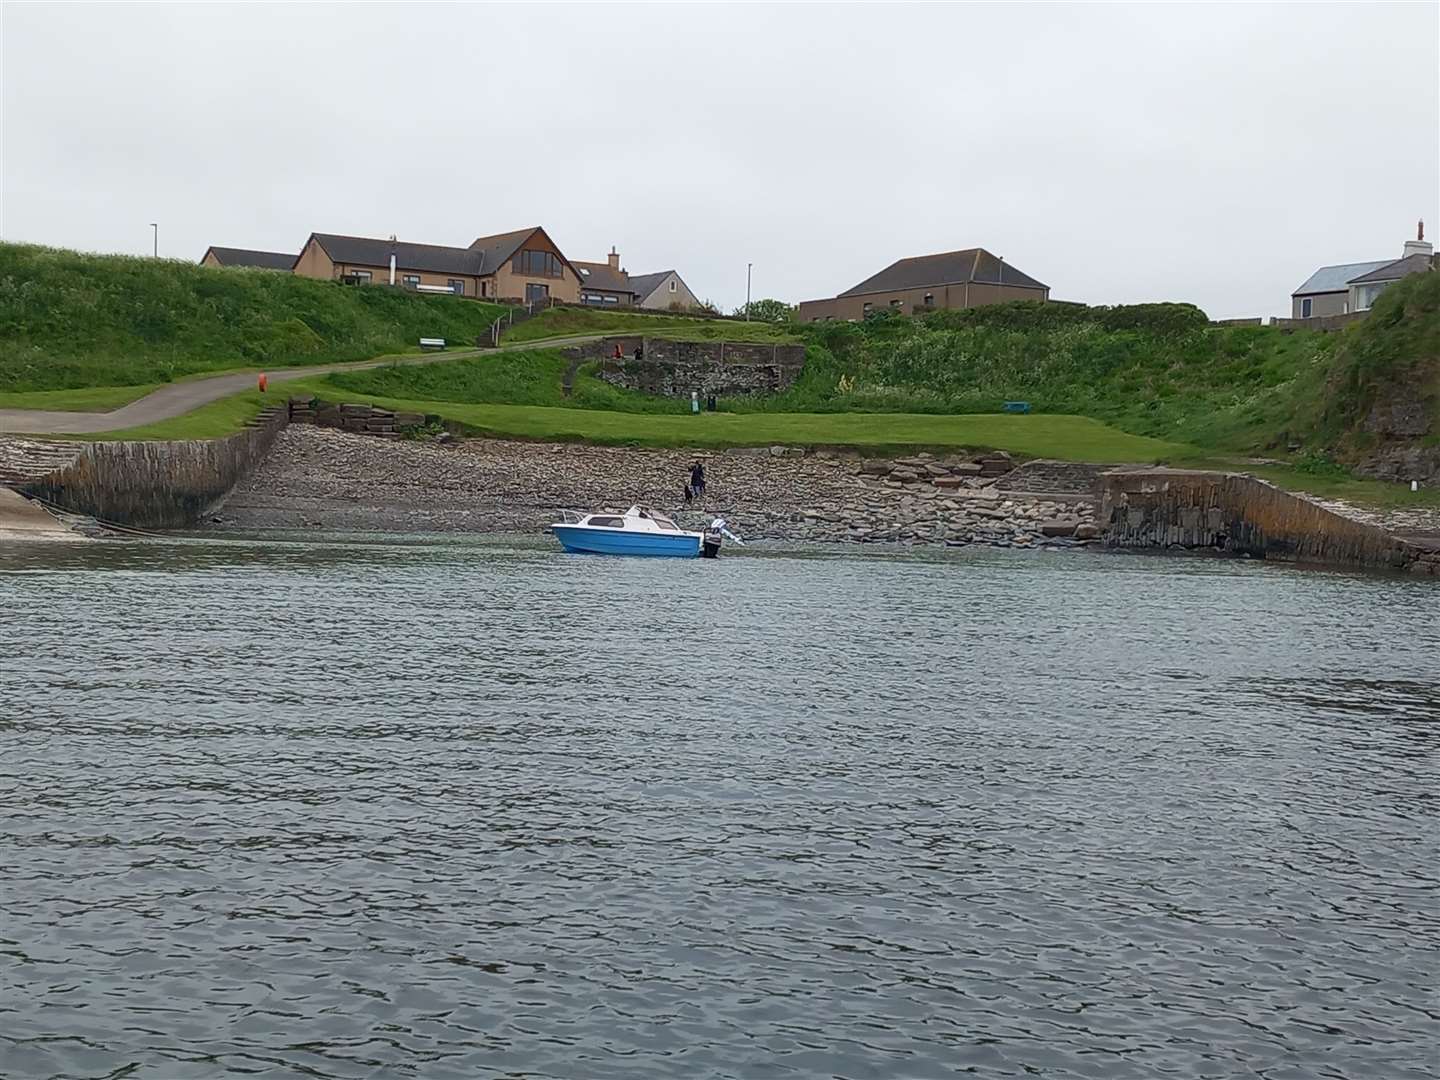 Derek Bremner sent this photo of a boat in Staxigoe Harbour.